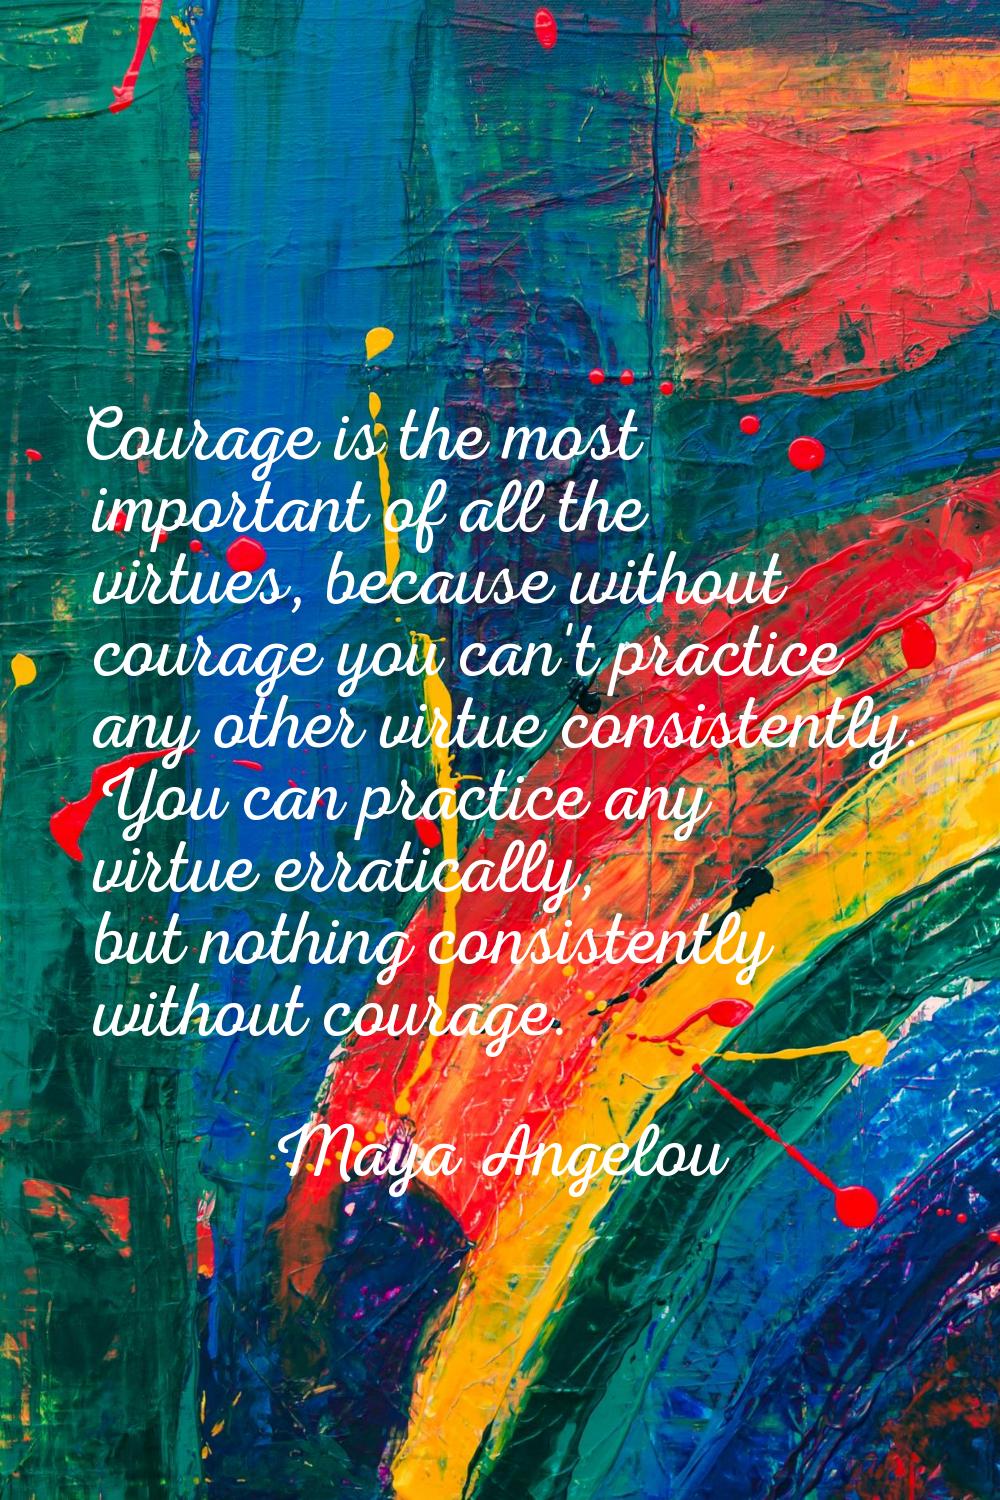 Courage is the most important of all the virtues, because without courage you can't practice any ot